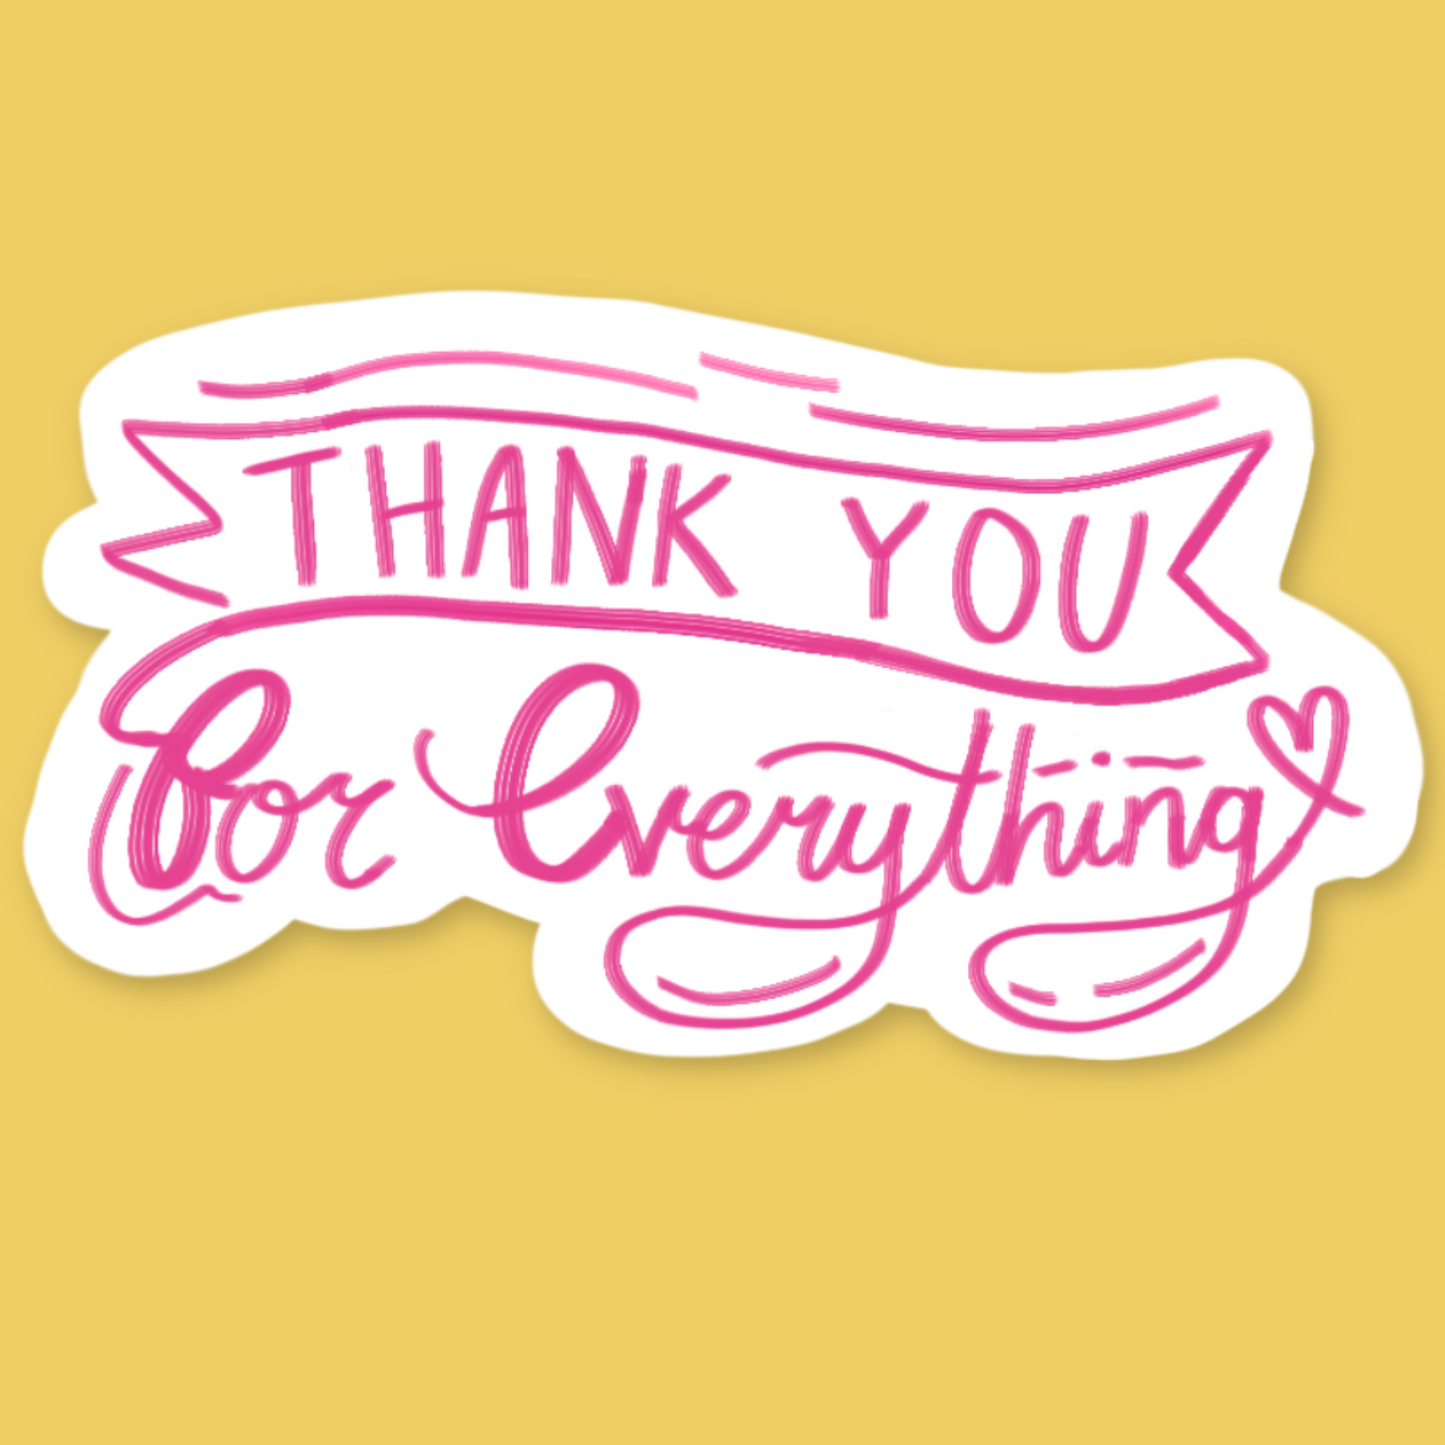 Thank You For Everything | Love Sticker | Friendship Gift